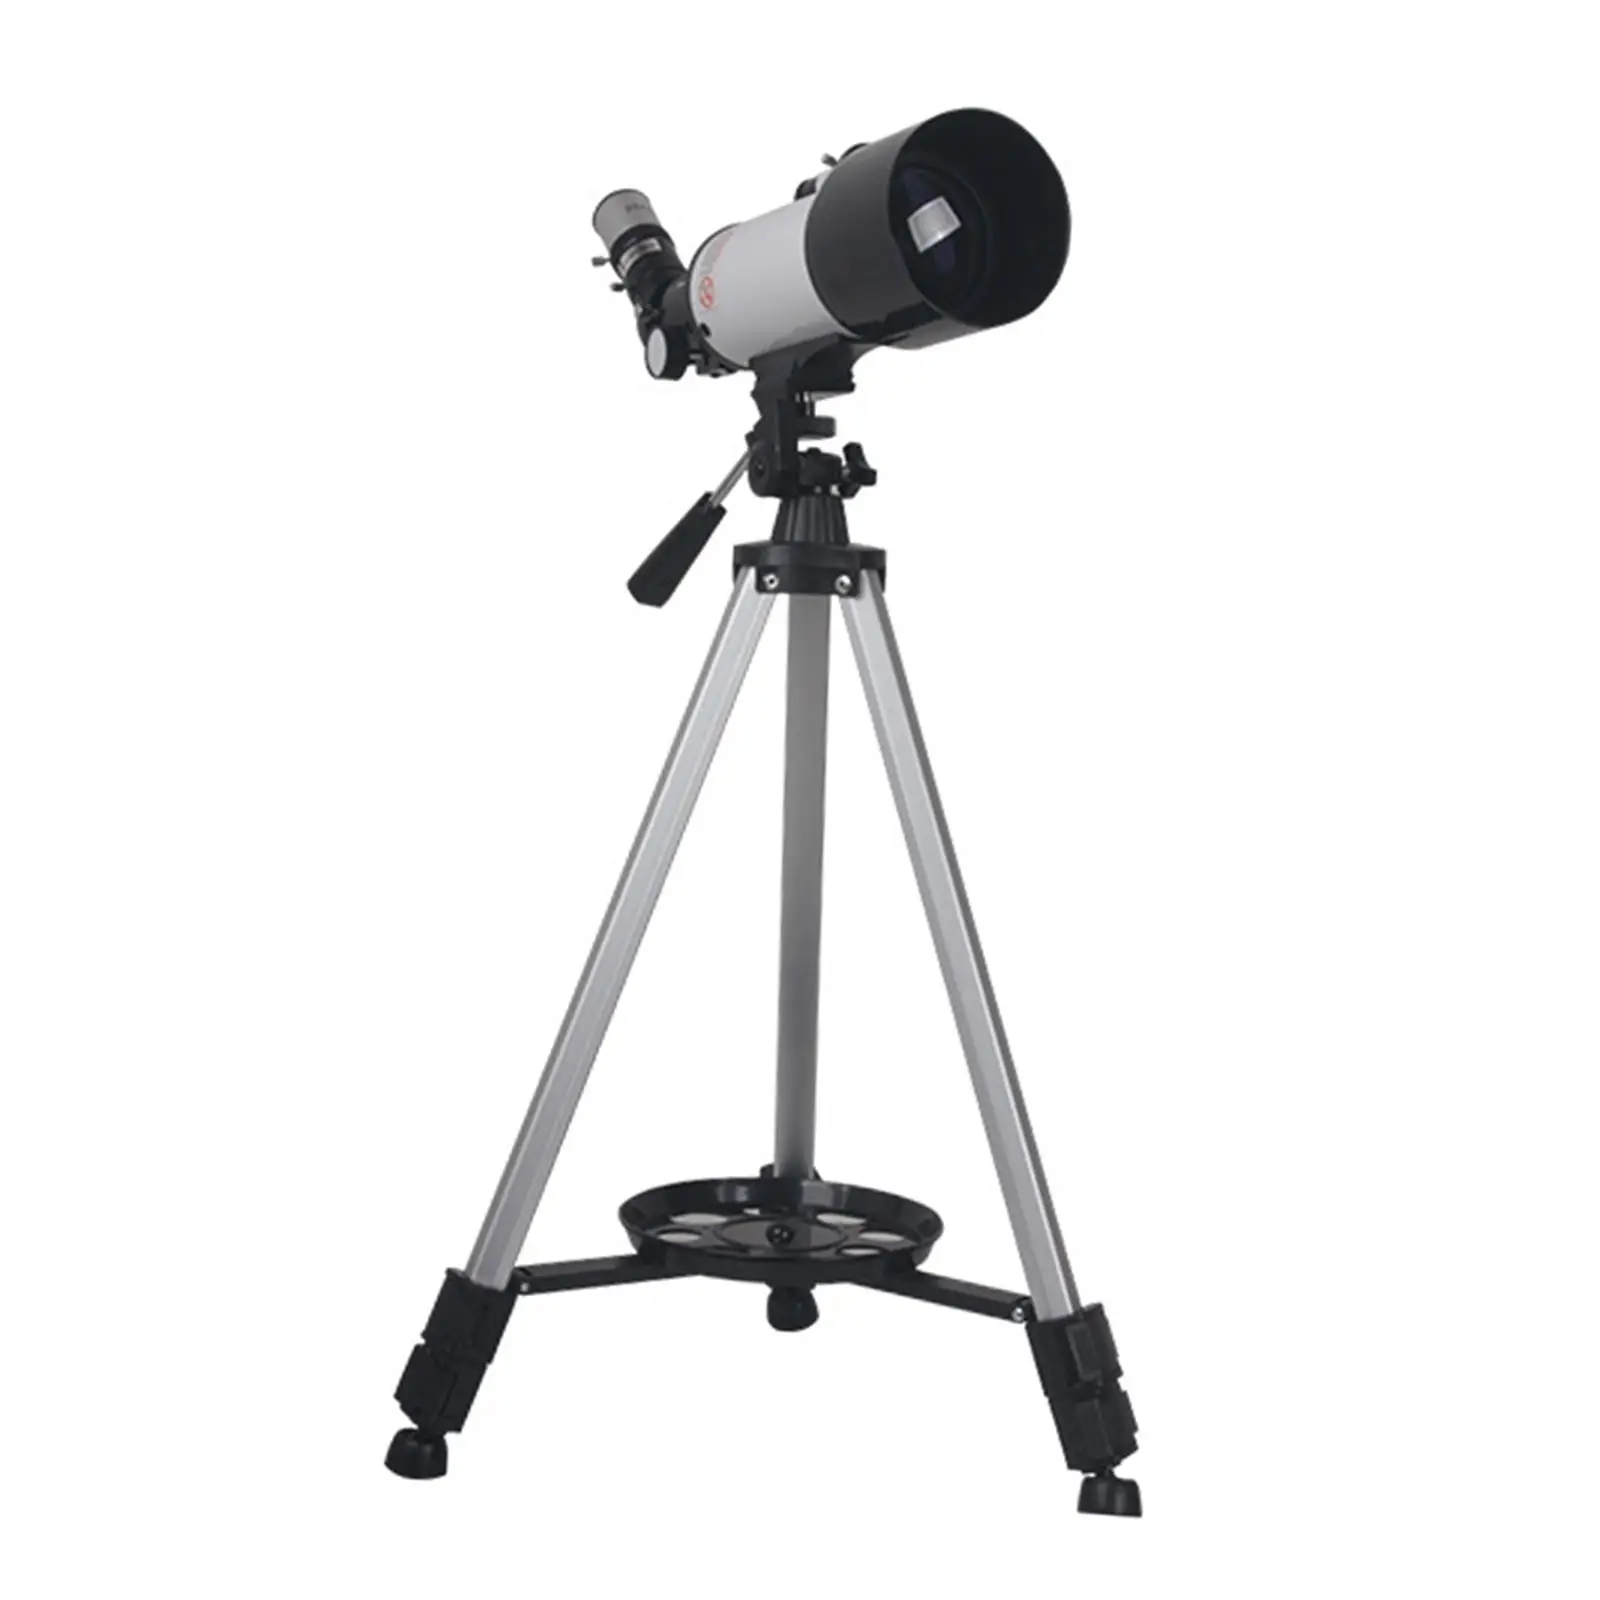 70mm 400mm Telescope with Tripod for Beginners Simple to Setup Erect Image Optics Astronomy Refractor Telescope Accessories